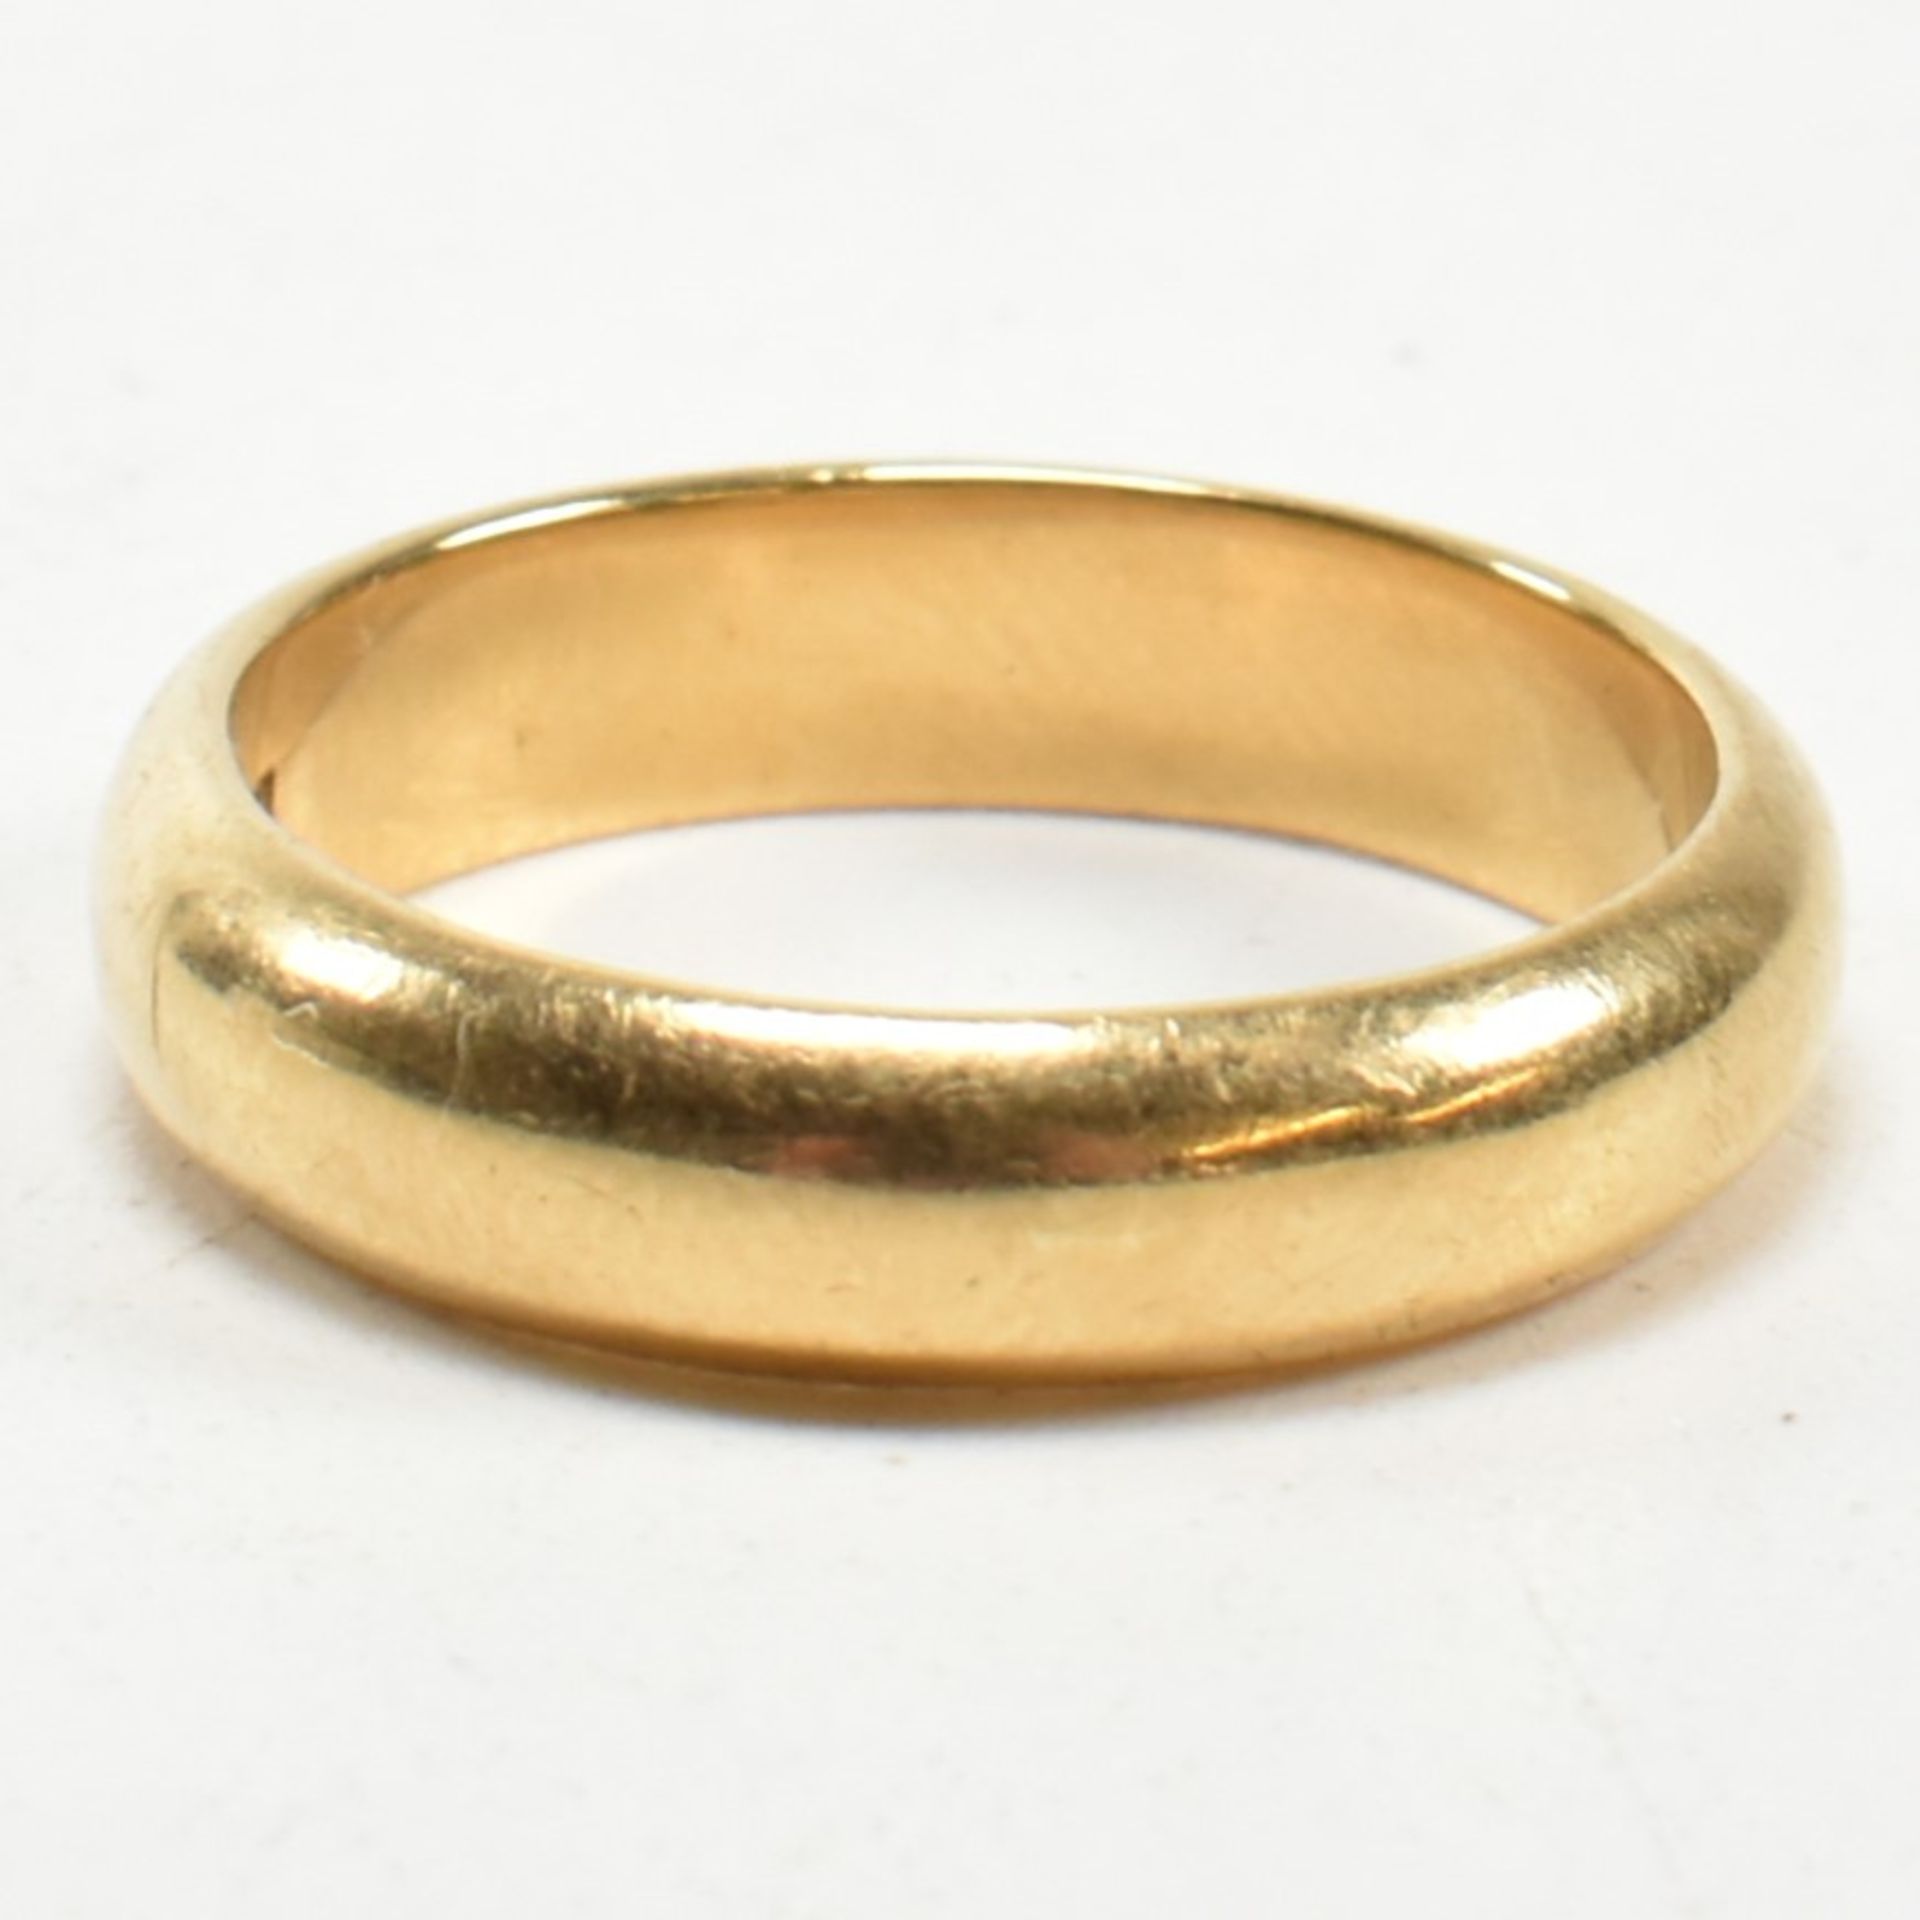 HALLMARKED 18CT GOLD BAND RING - Image 2 of 5